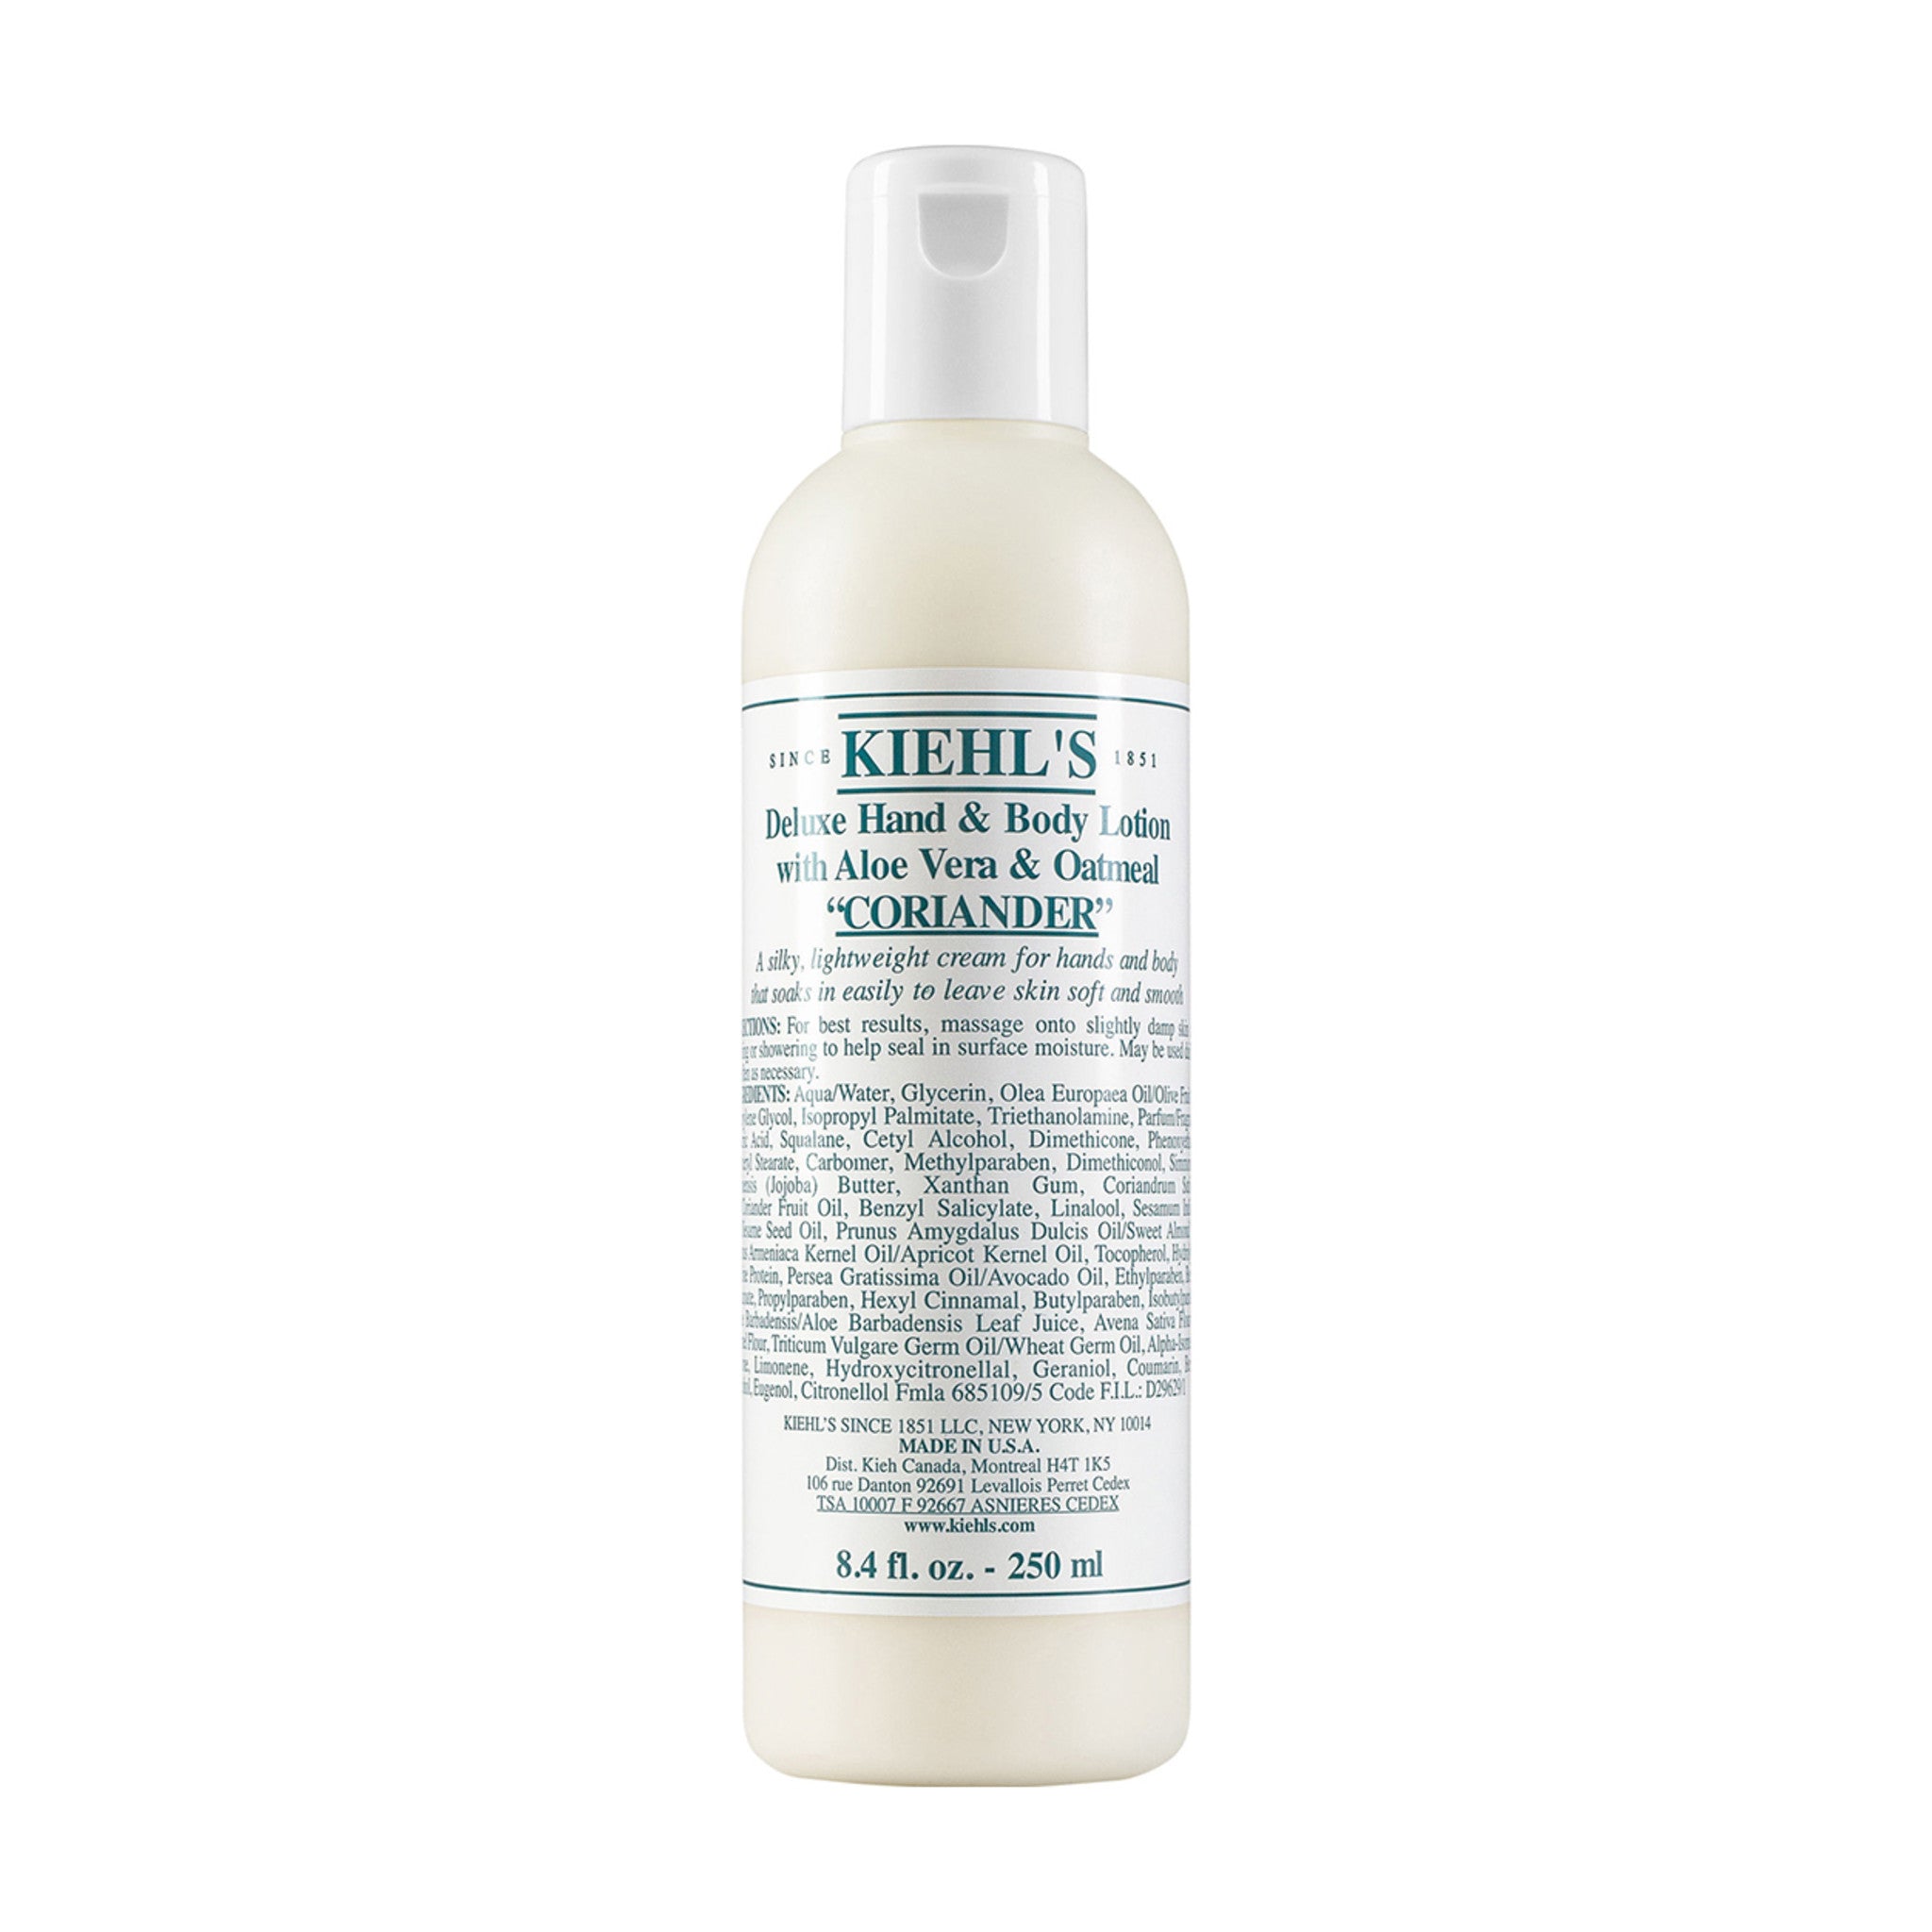 Kiehl's Since 1851 Hand And Body Lotion With Aloe Vera And Oatmeal Color/Shade variant: Coriander  main image.